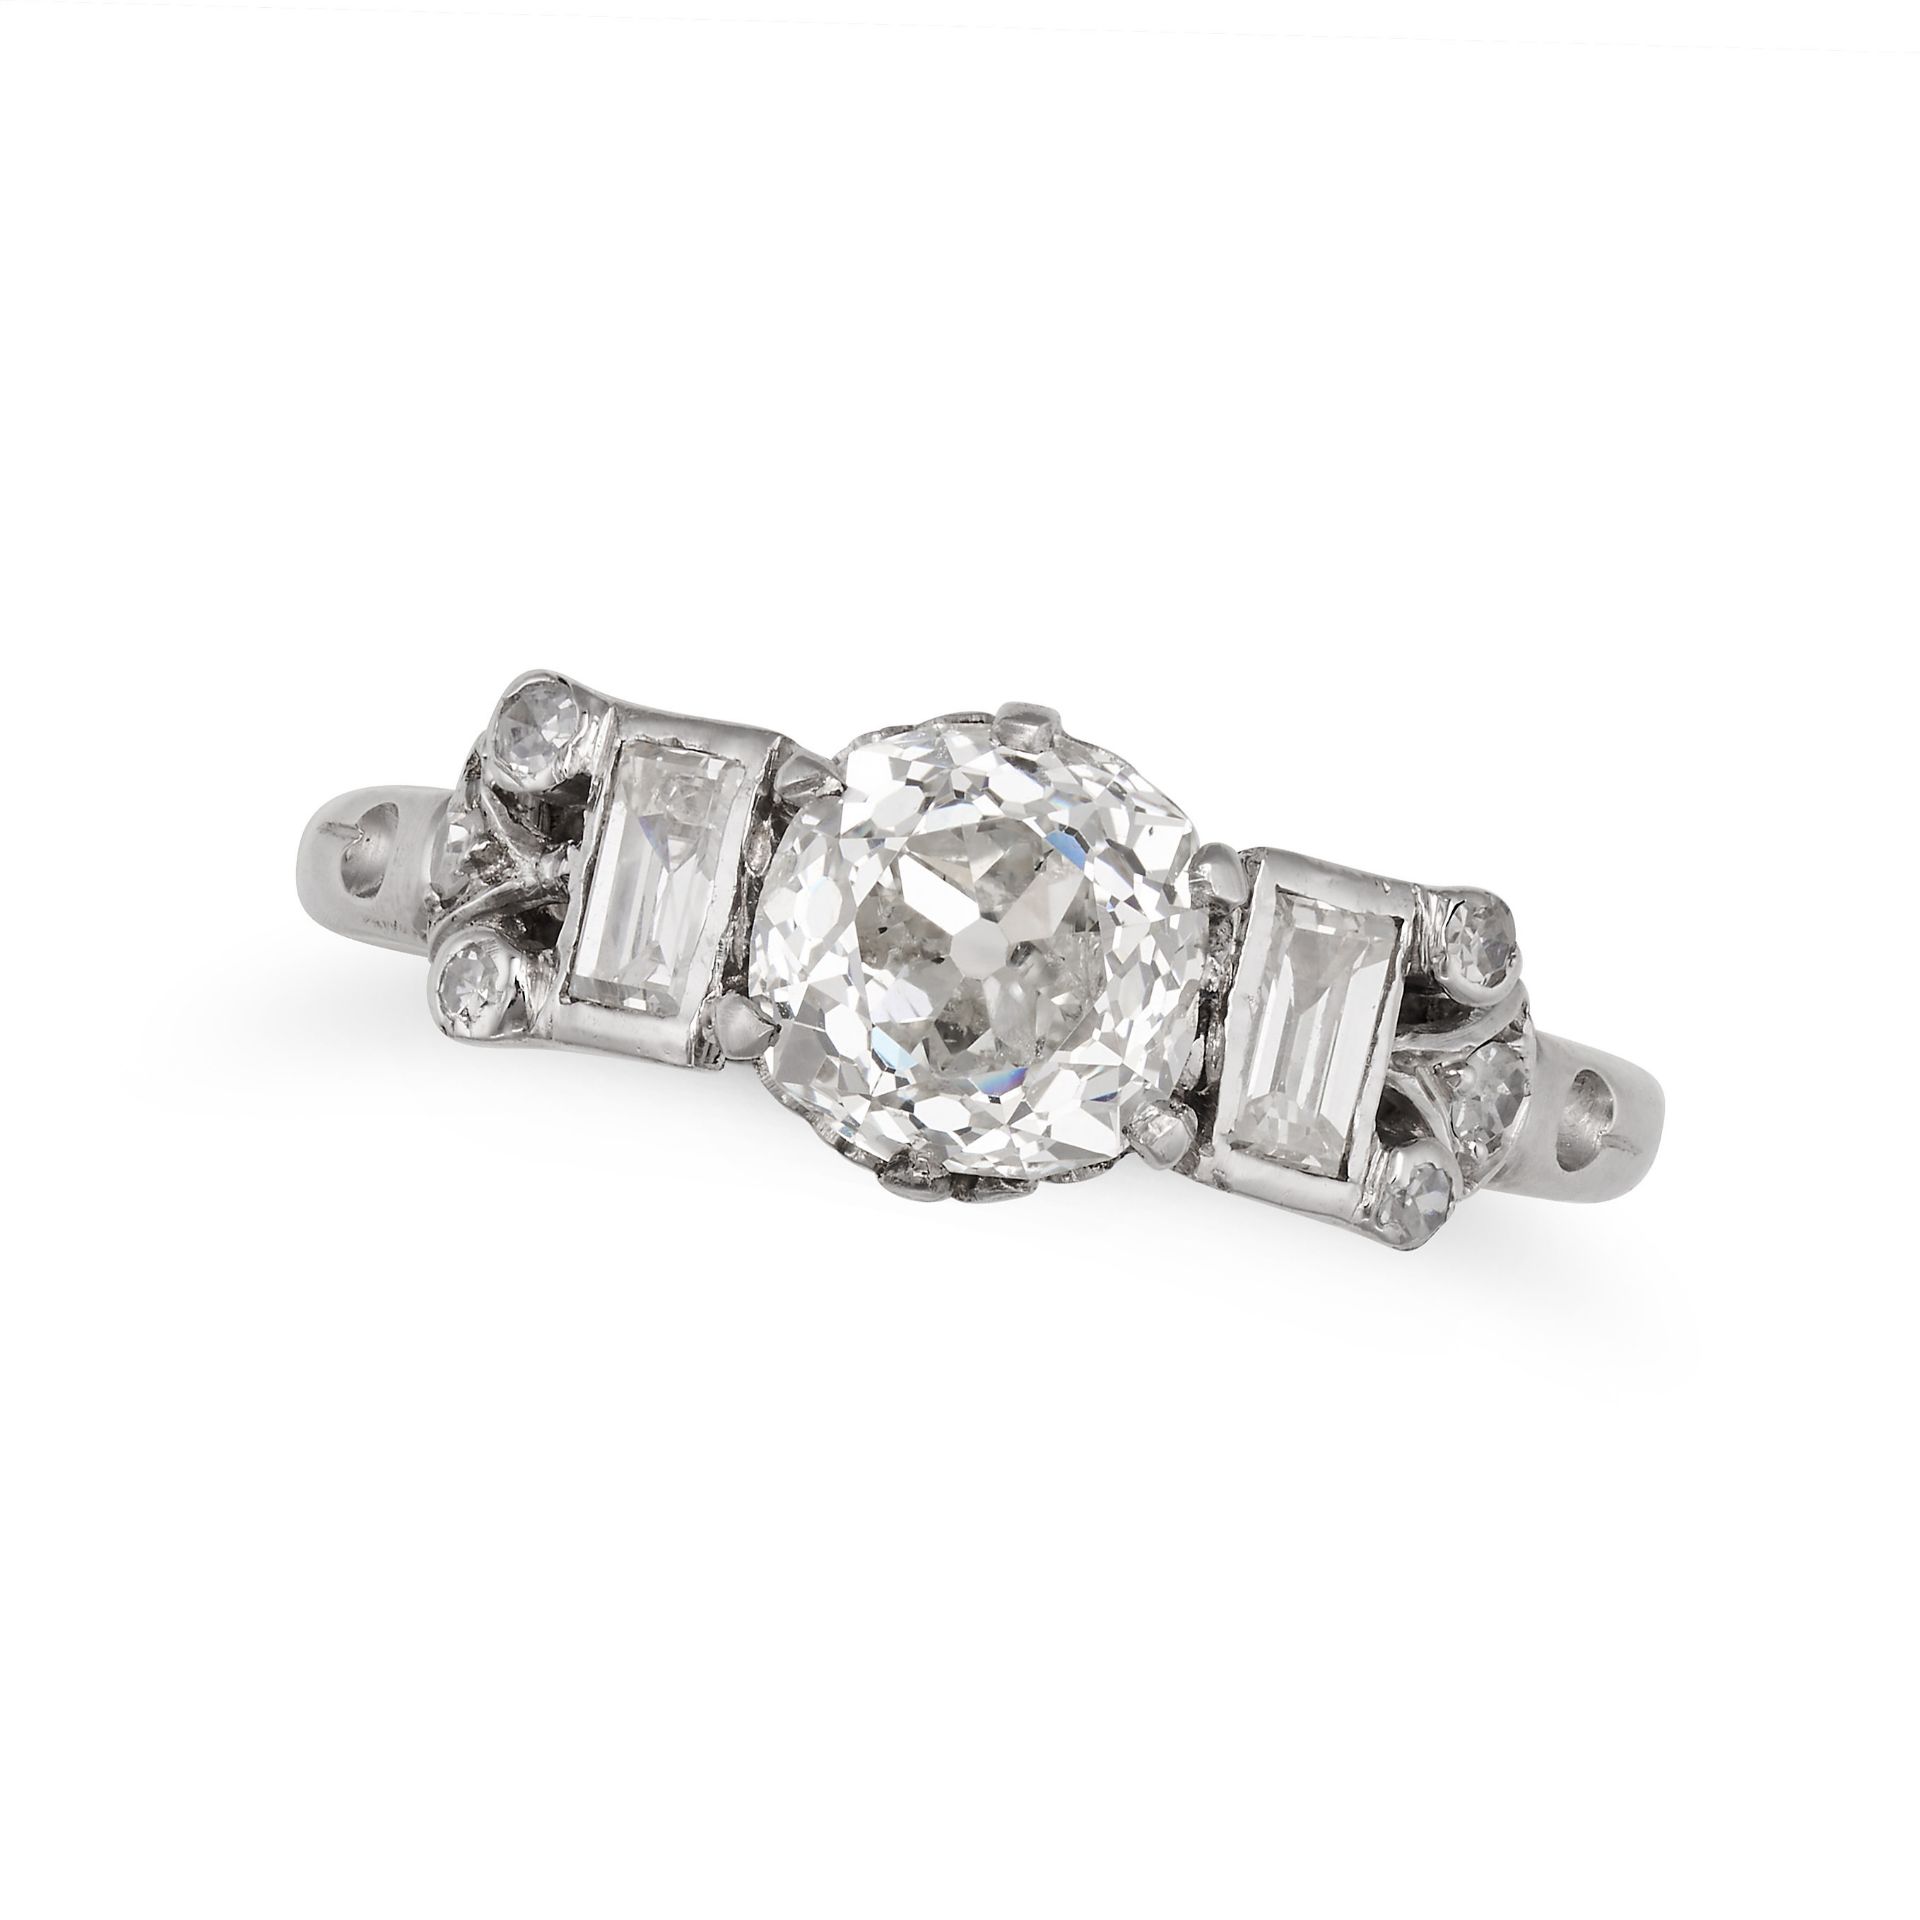 A DIAMOND DRESS RING in platinum, set with an old cut diamond of approximately 1.10 carats, flank...